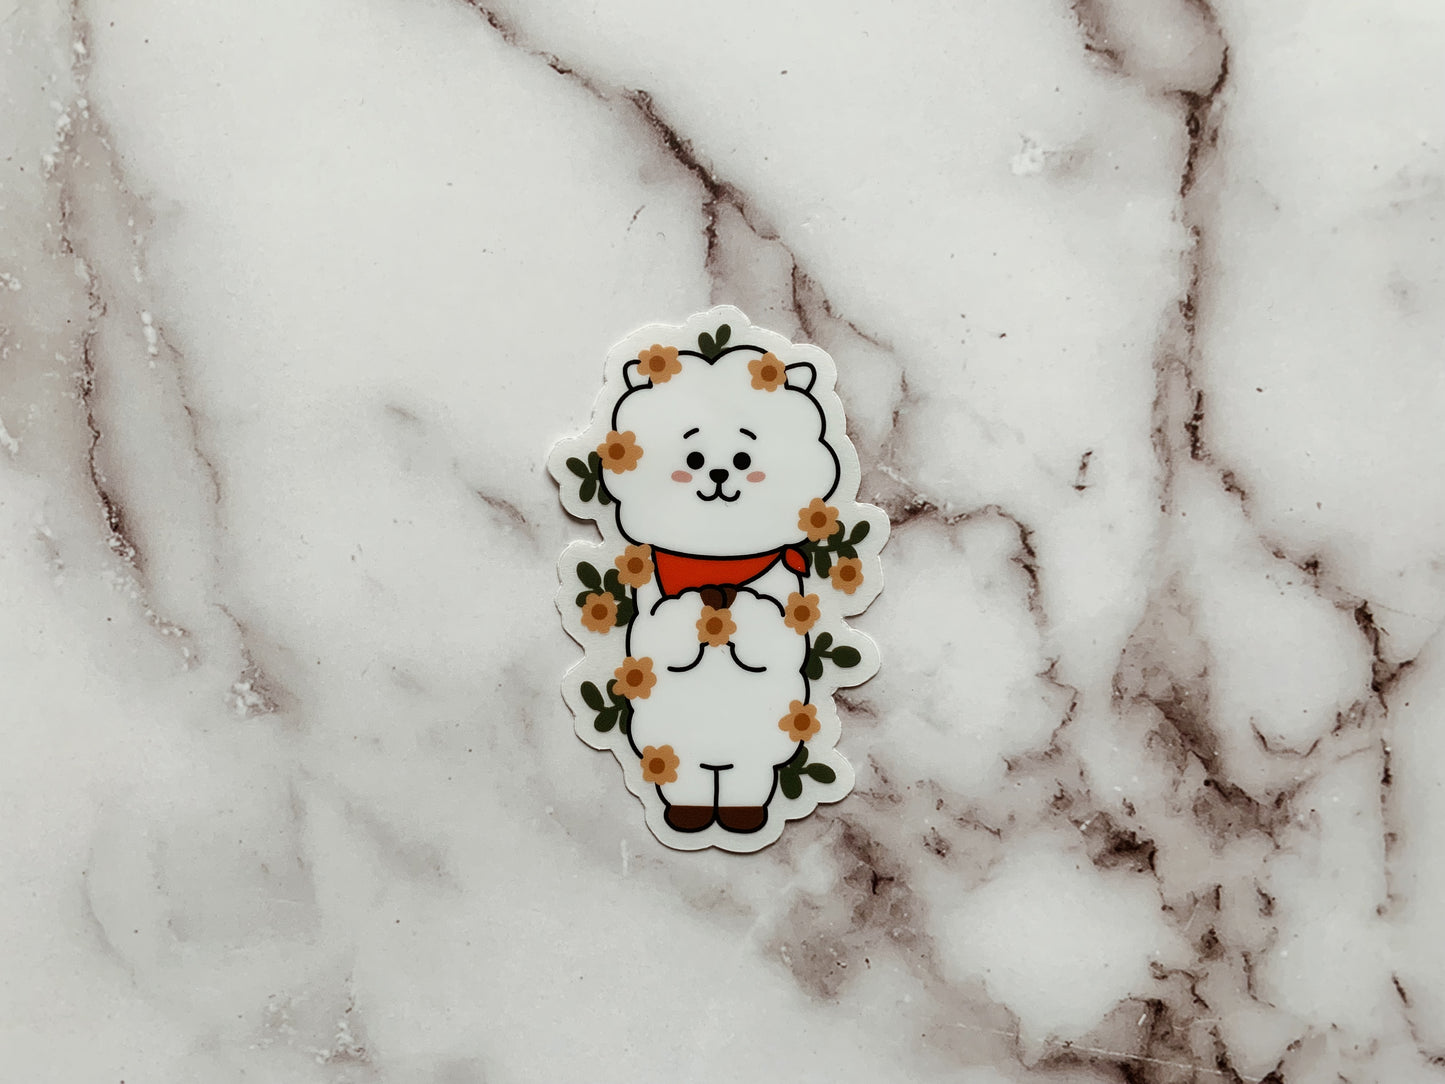 Floral BT21 Individual Character Stickers